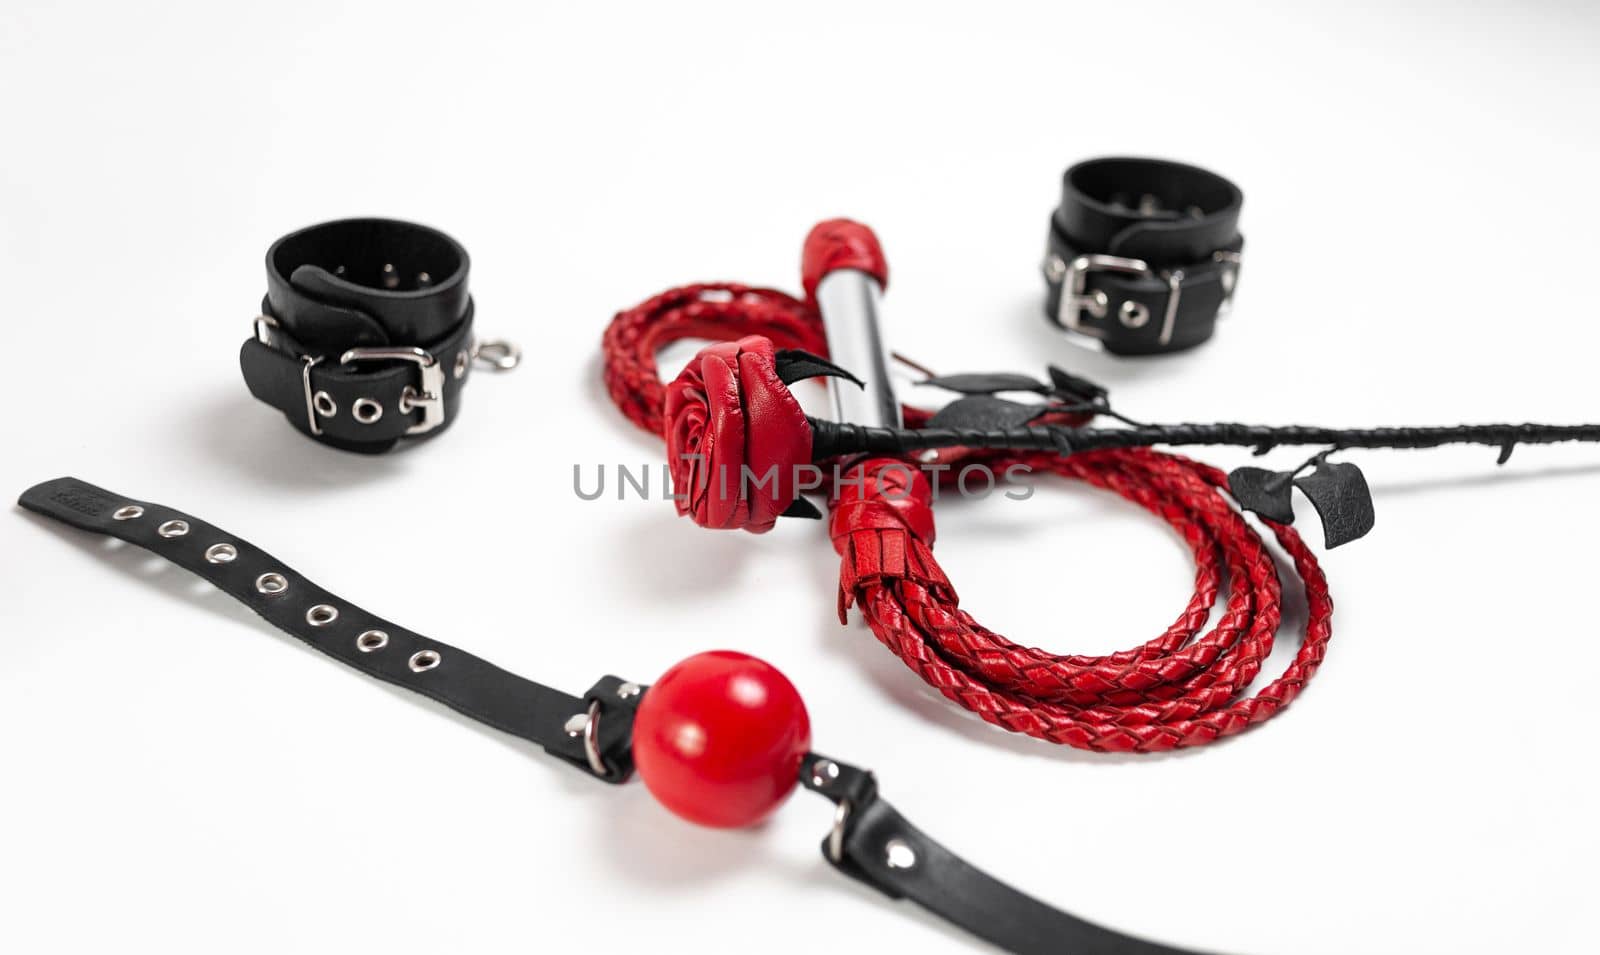 For the March 8 holiday sexy bdsm sex play accessories set from a sex shop on a white background copy-paste